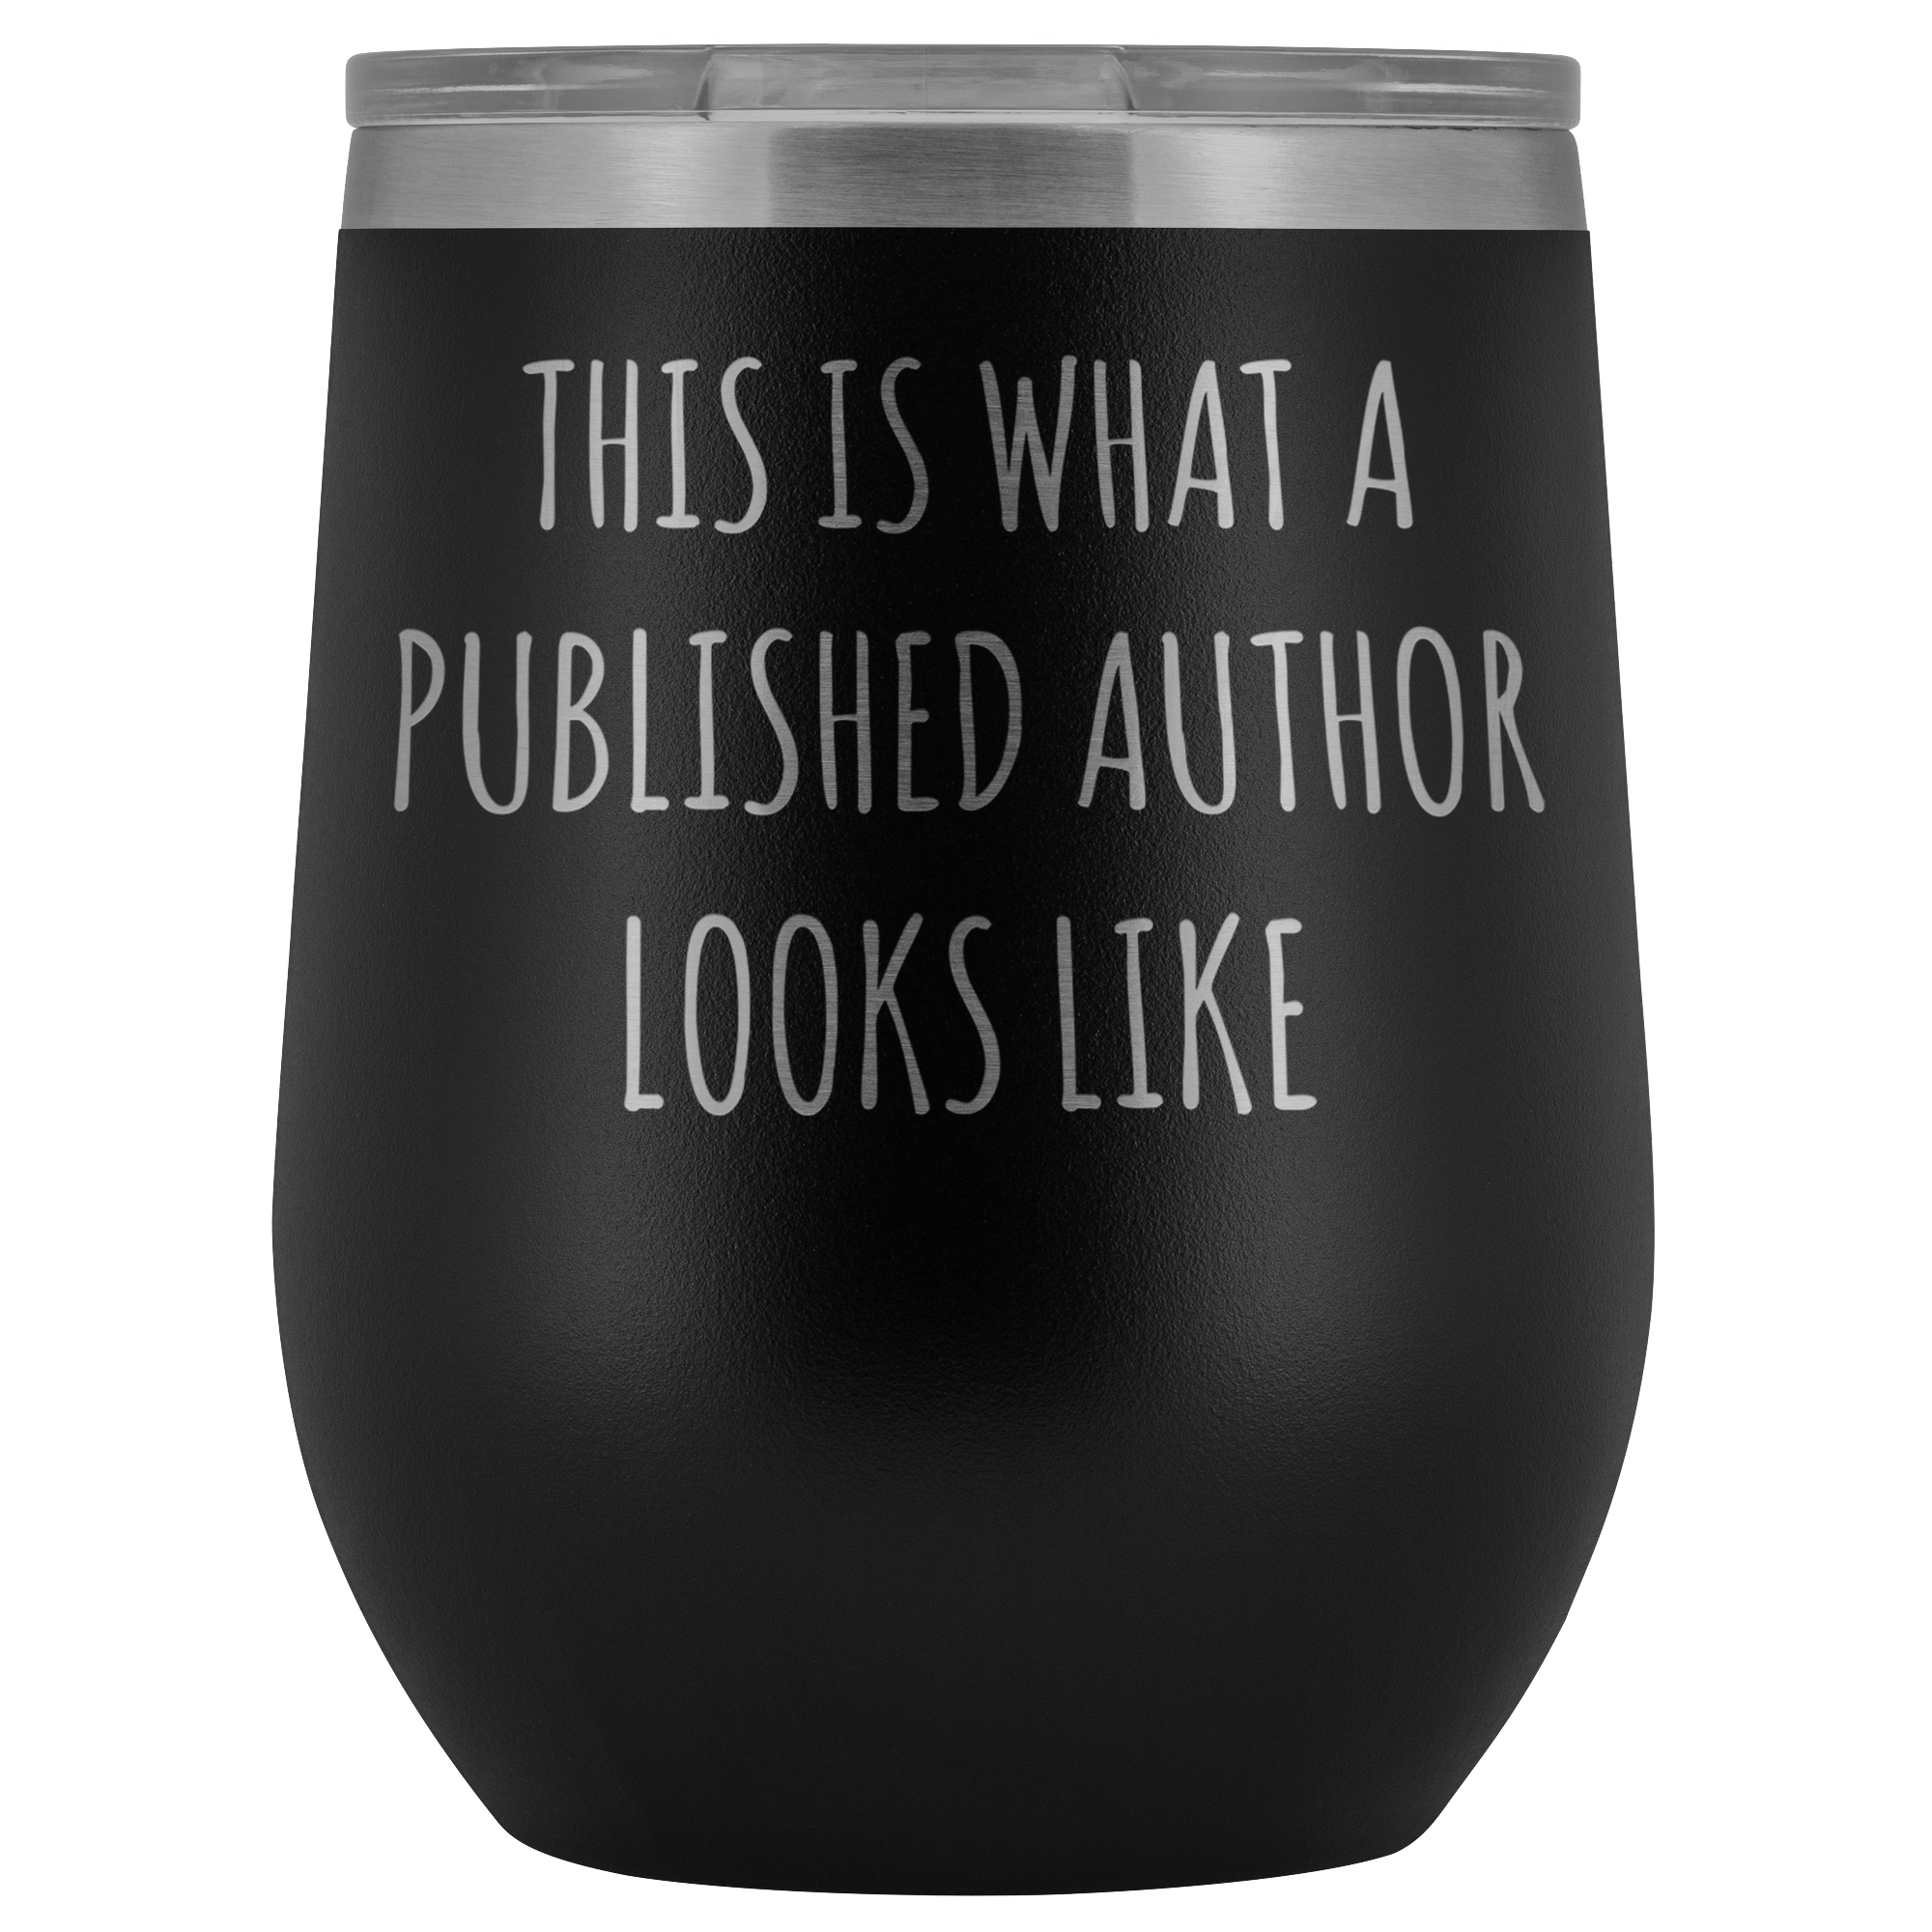 Book Author Gift This is What a Published Author Looks Like Stemless Insulated Wine Tumbler Cup BPA Free 12oz